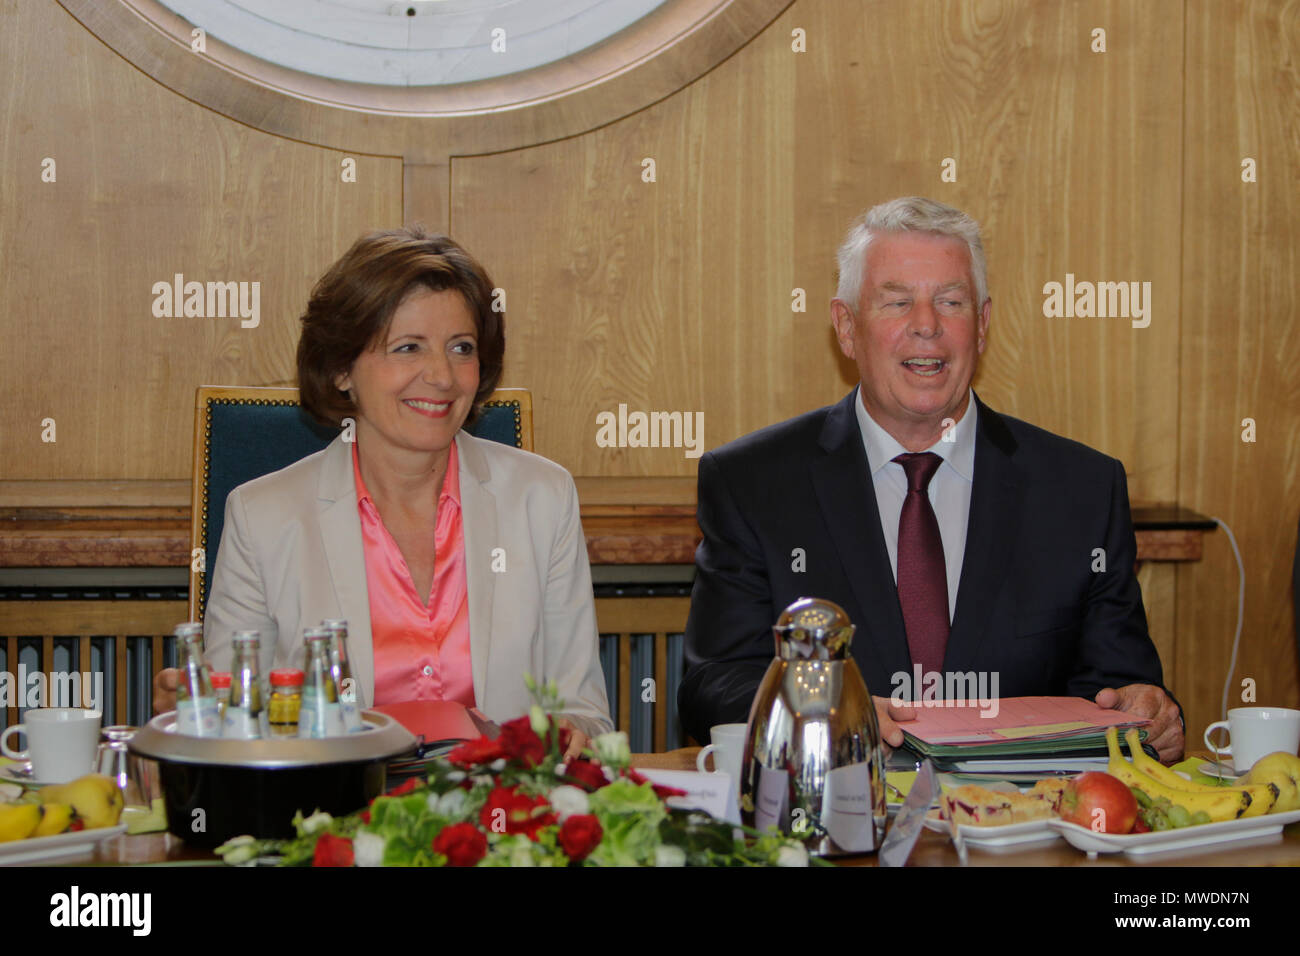 Worms, Germany. 1st June 2018. The Rhineland-Palatinate Minister‐President Malu Dreyer (left) and the Lord Mayor of Worms, Michael Kissel (right), are pictured ahead of the cabinet meeting. The Rhineland-Palatine cabinet of Minister‐President Malu Dreyer met in the City Hall in Worms, ahead of the opening of the Rheinland-Pfalz-Tag 2018. Malu Dreyer and her cabinet signed the Golden Book of the city of Worms after the meeting. Around 300.000 visitors are expected in the 34. . Credit: Michael Debets/Alamy Live News Stock Photo